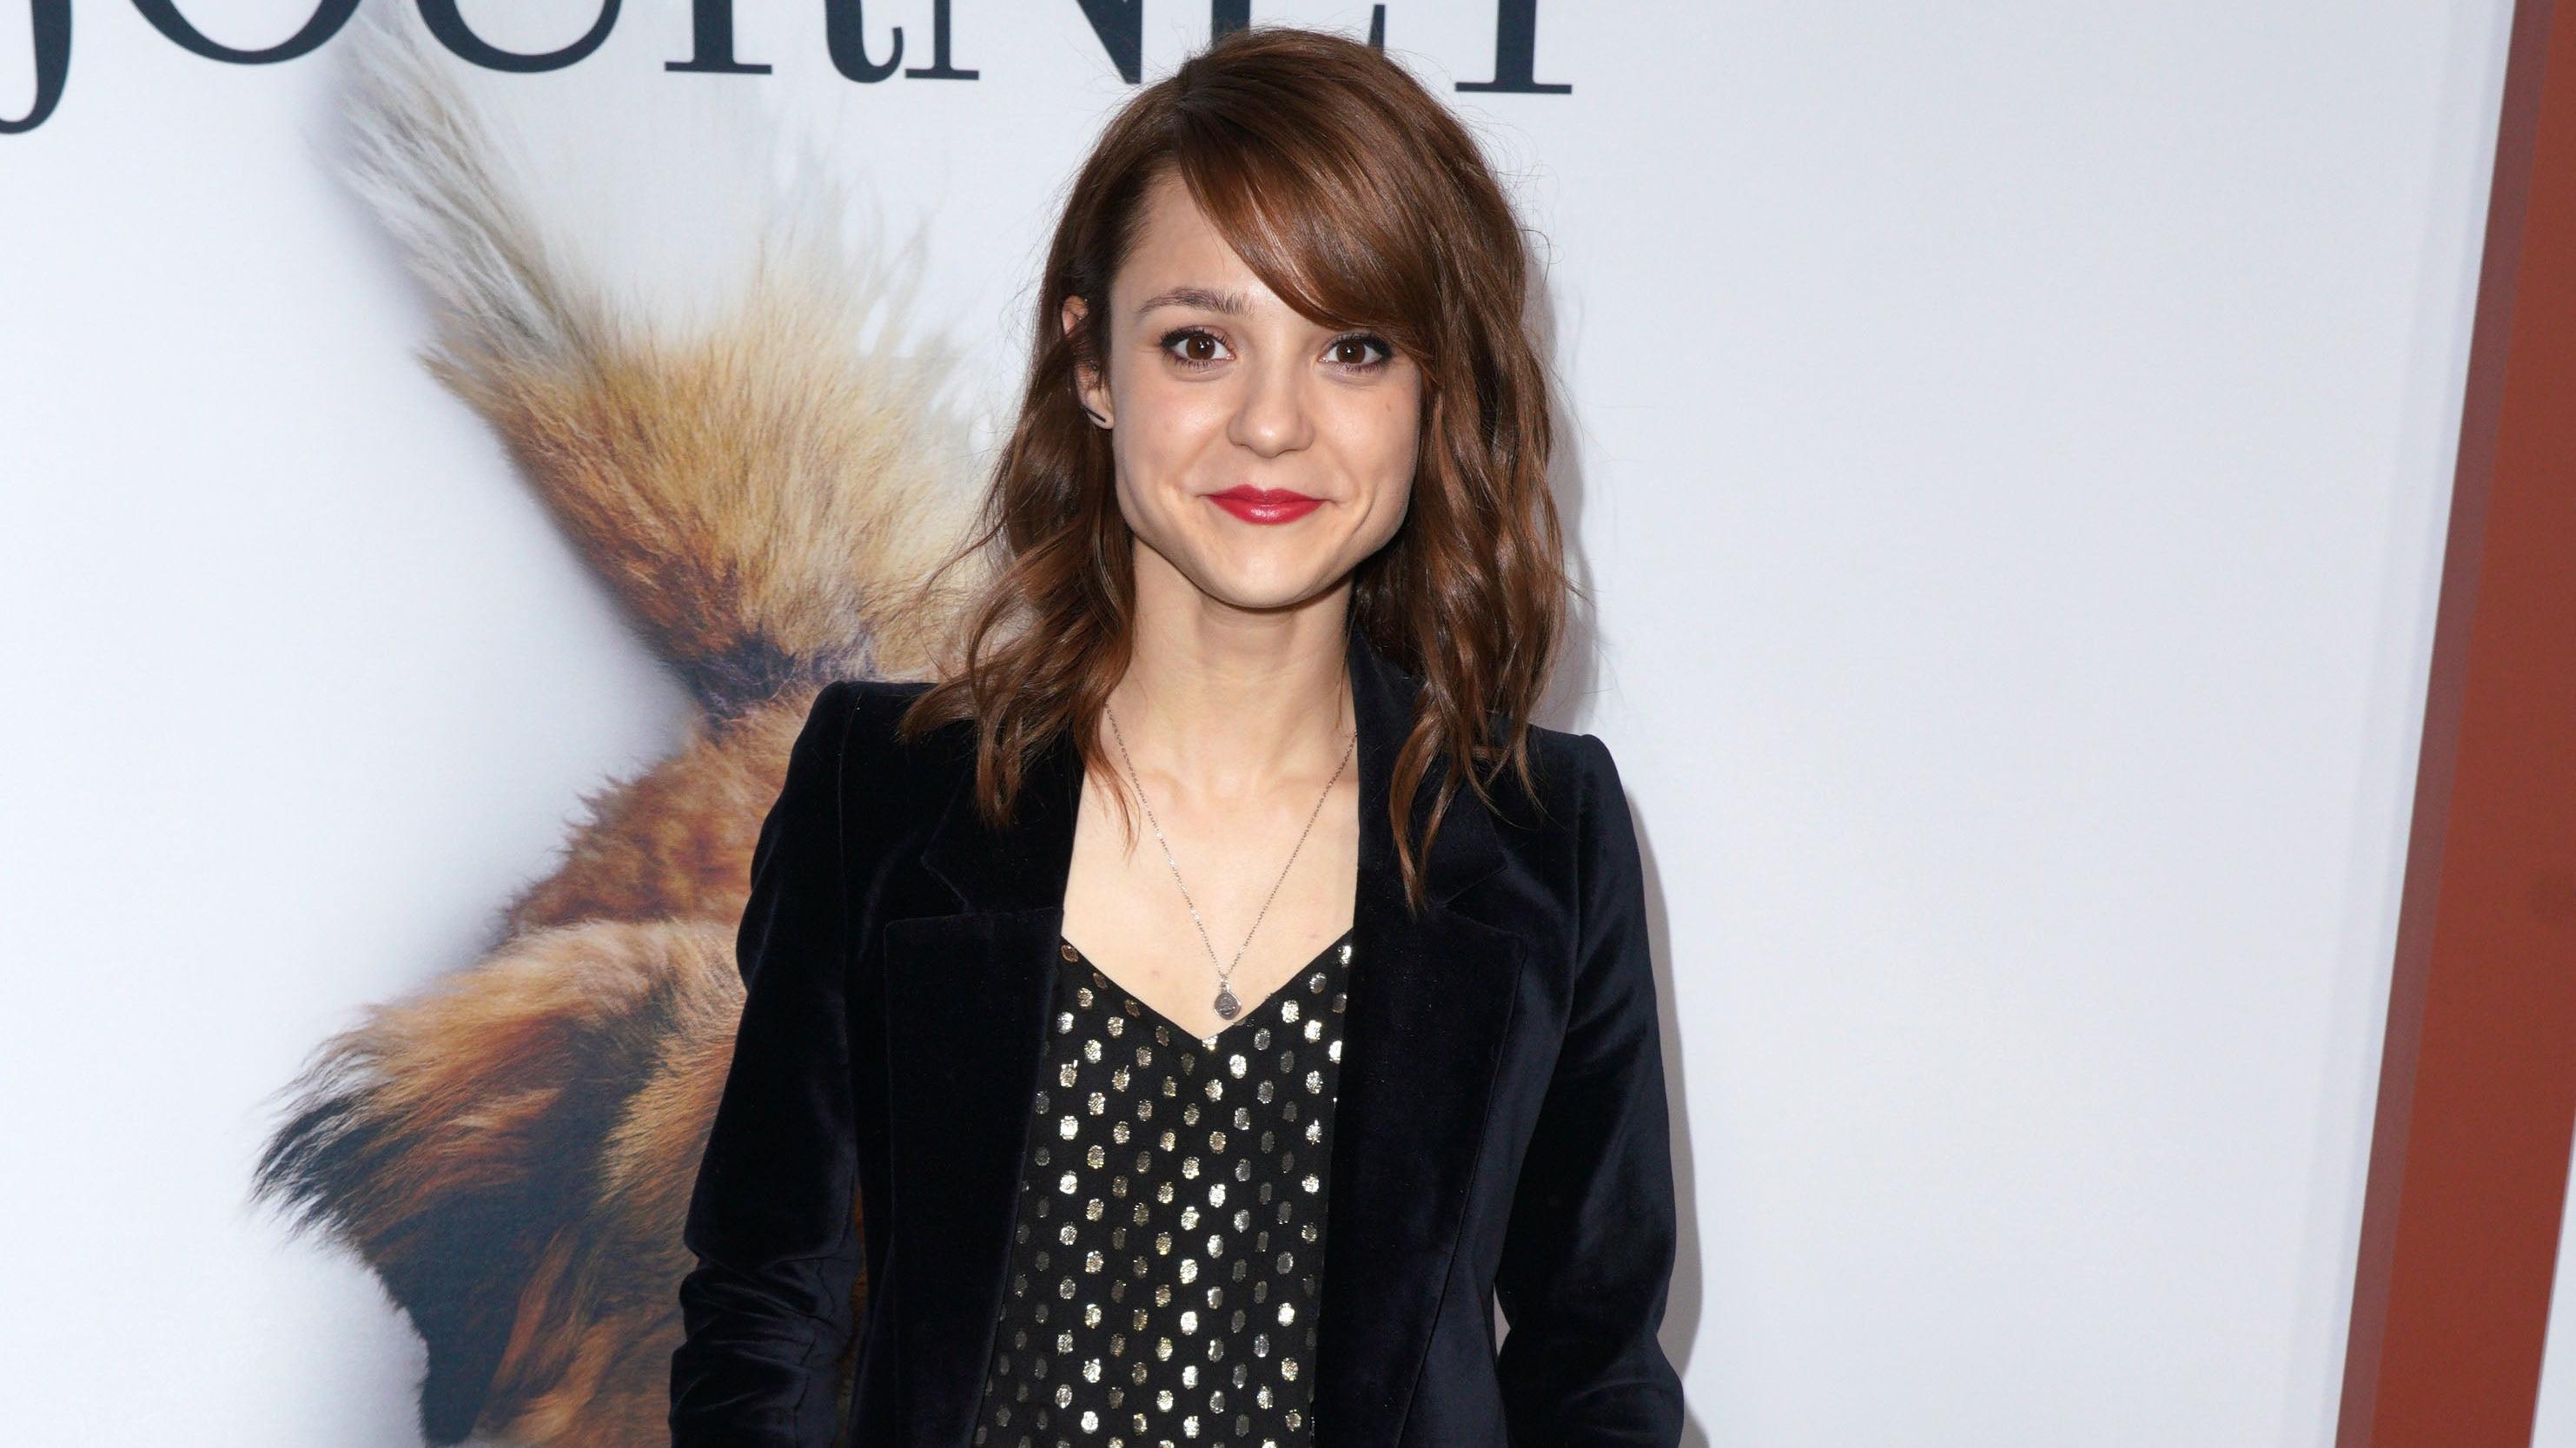 Skins star Kathryn Prescott gives update on her recovery after truck accident in New York